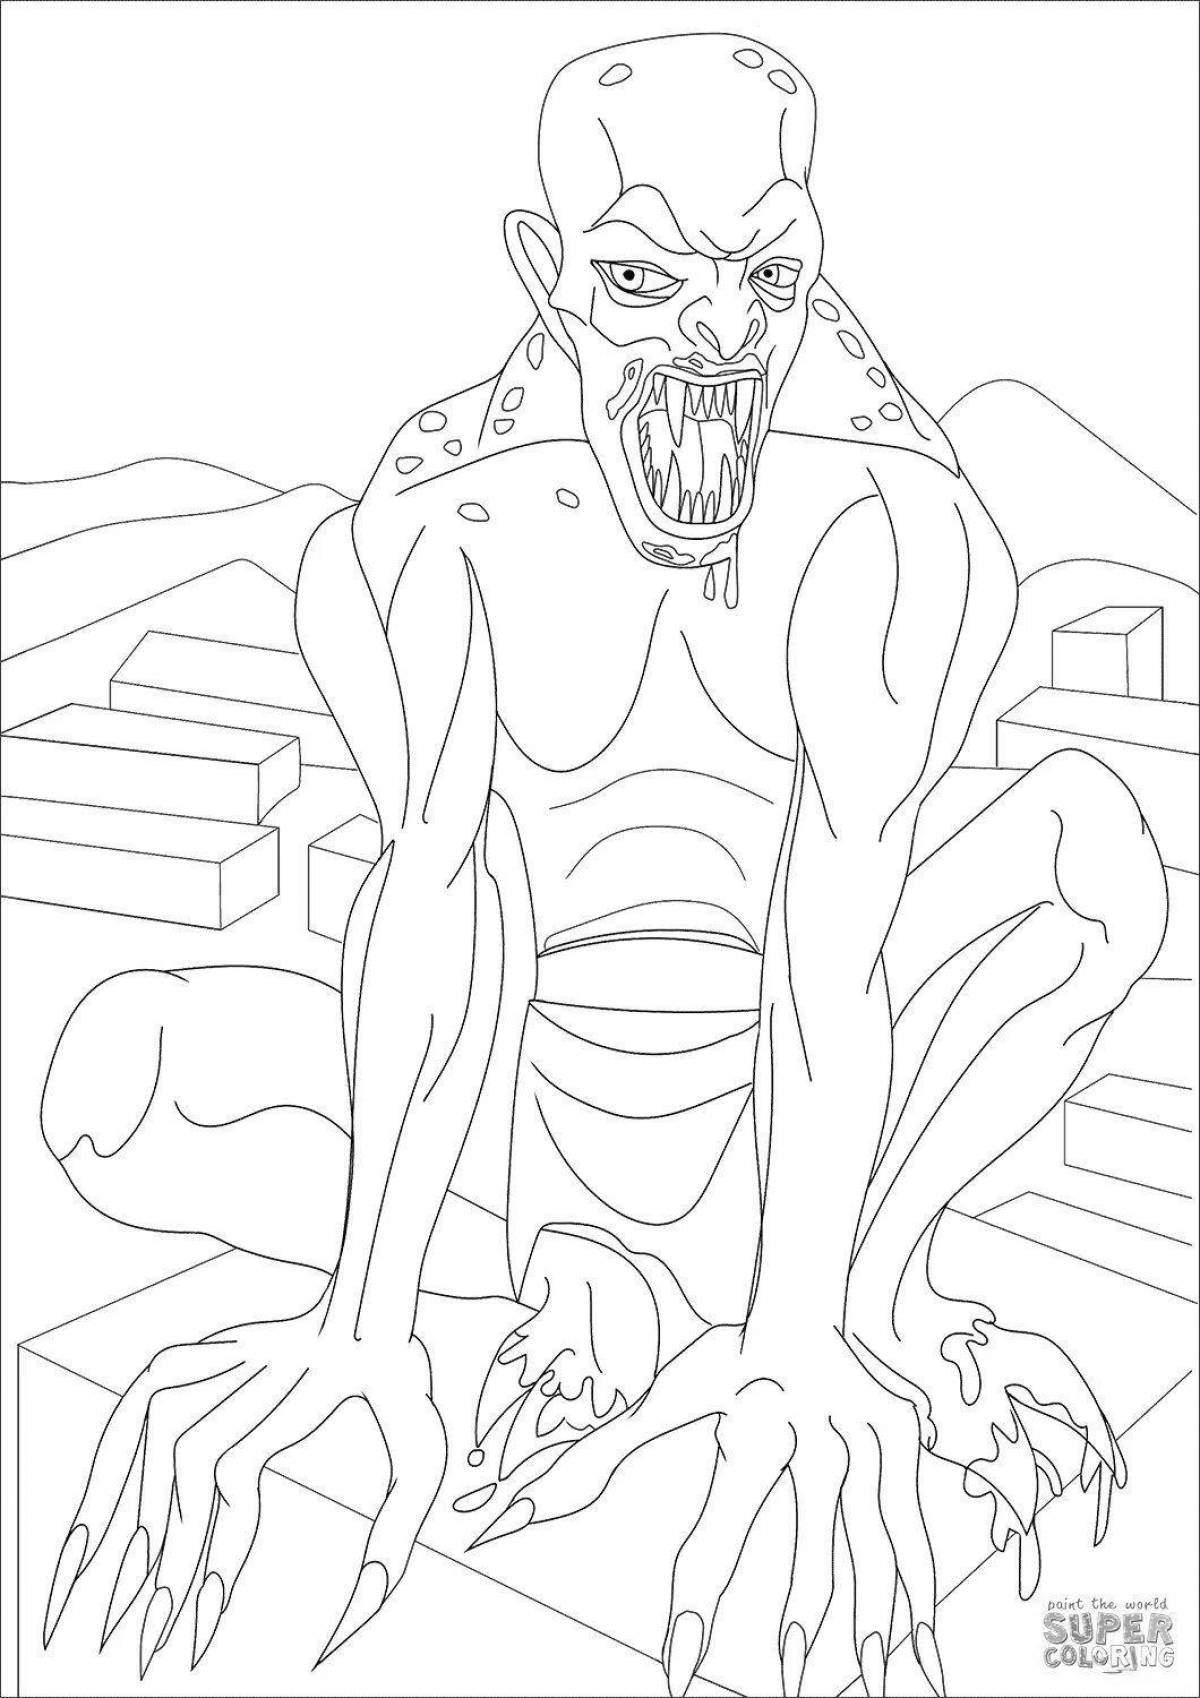 Scp superb monsters coloring book